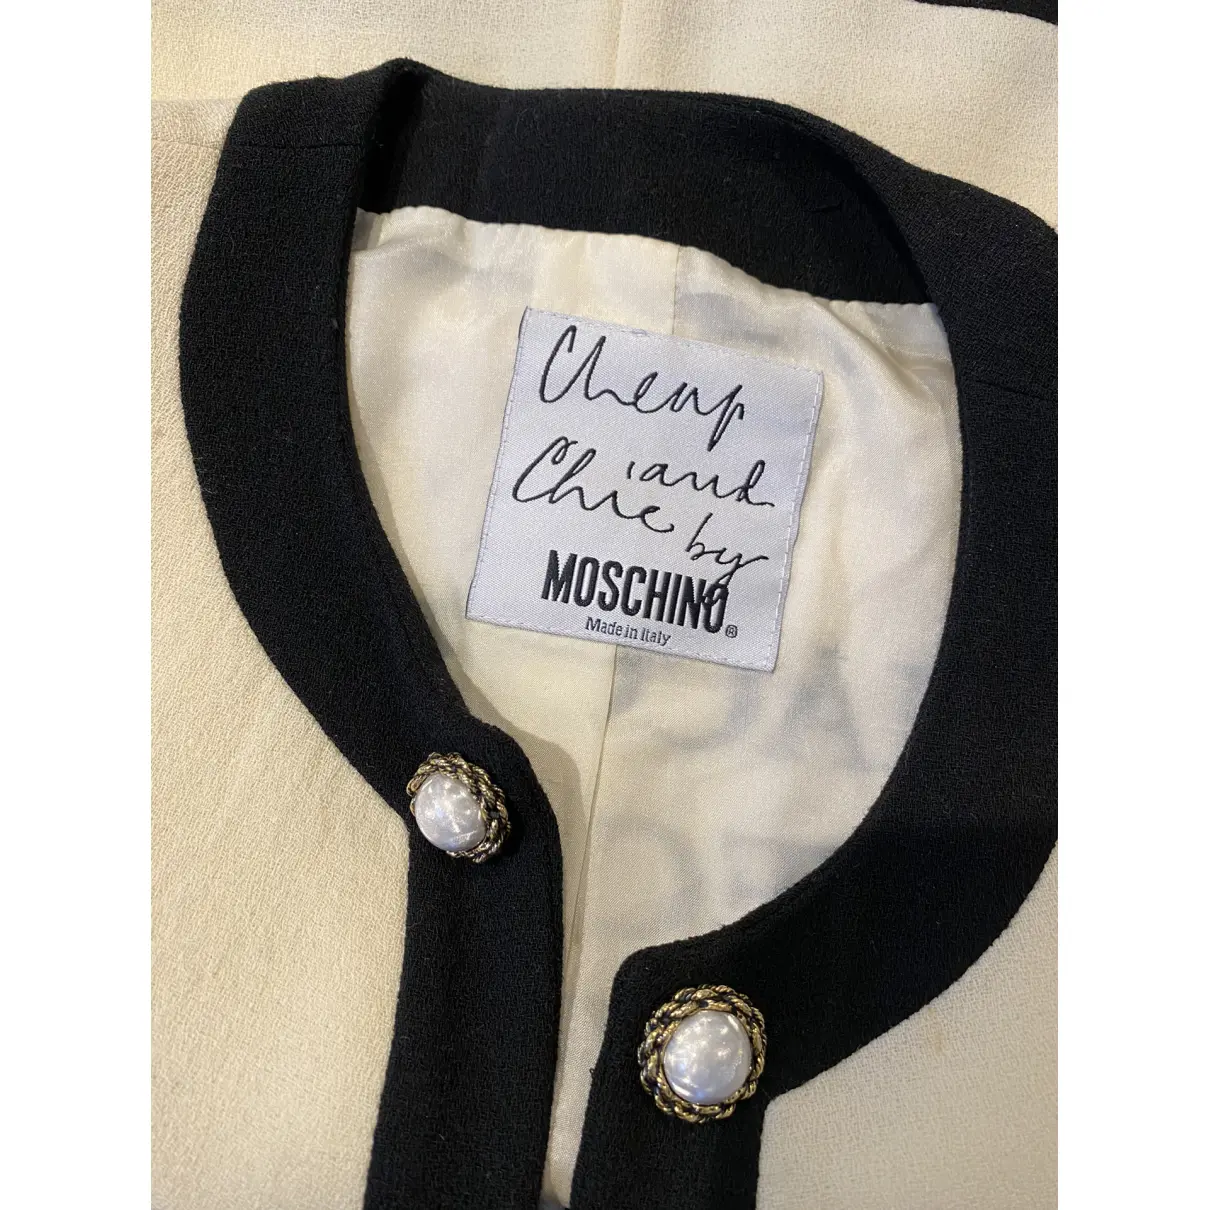 Buy Moschino Cheap And Chic Wool suit jacket online - Vintage